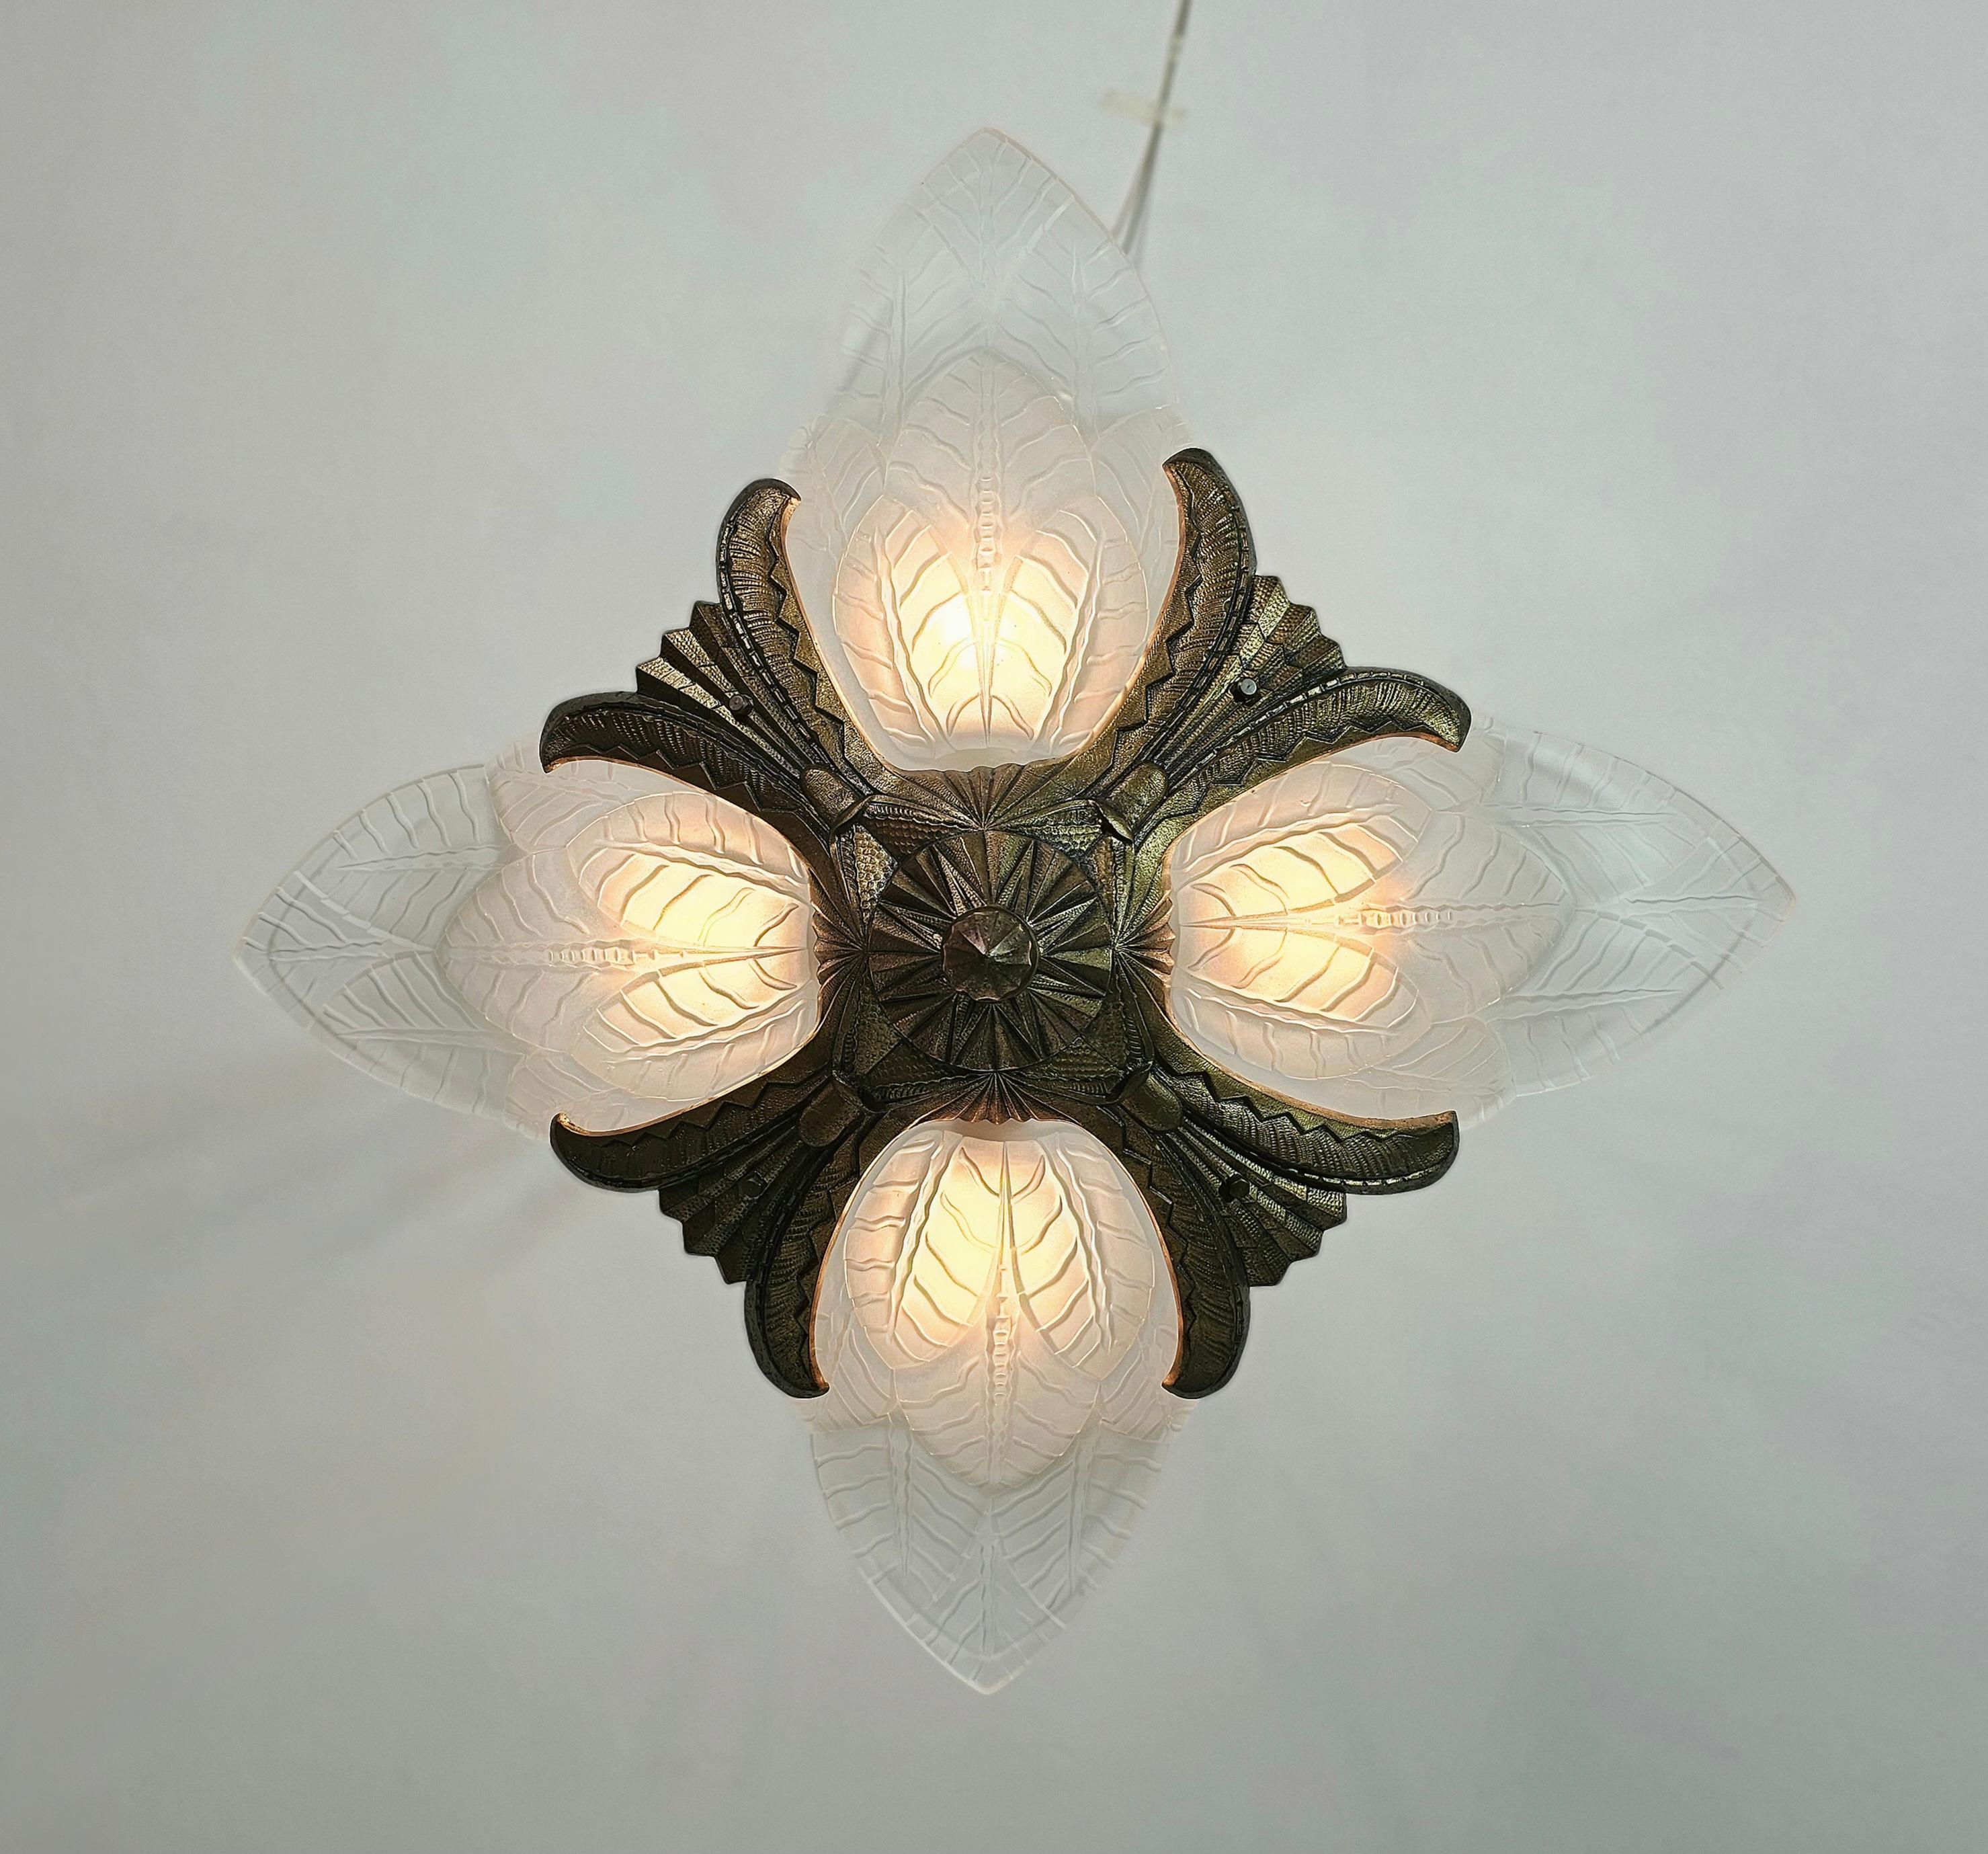 Chandelier Pendant Bronze Frosted Glass Art Deco French Design 1930s 1940s For Sale 4